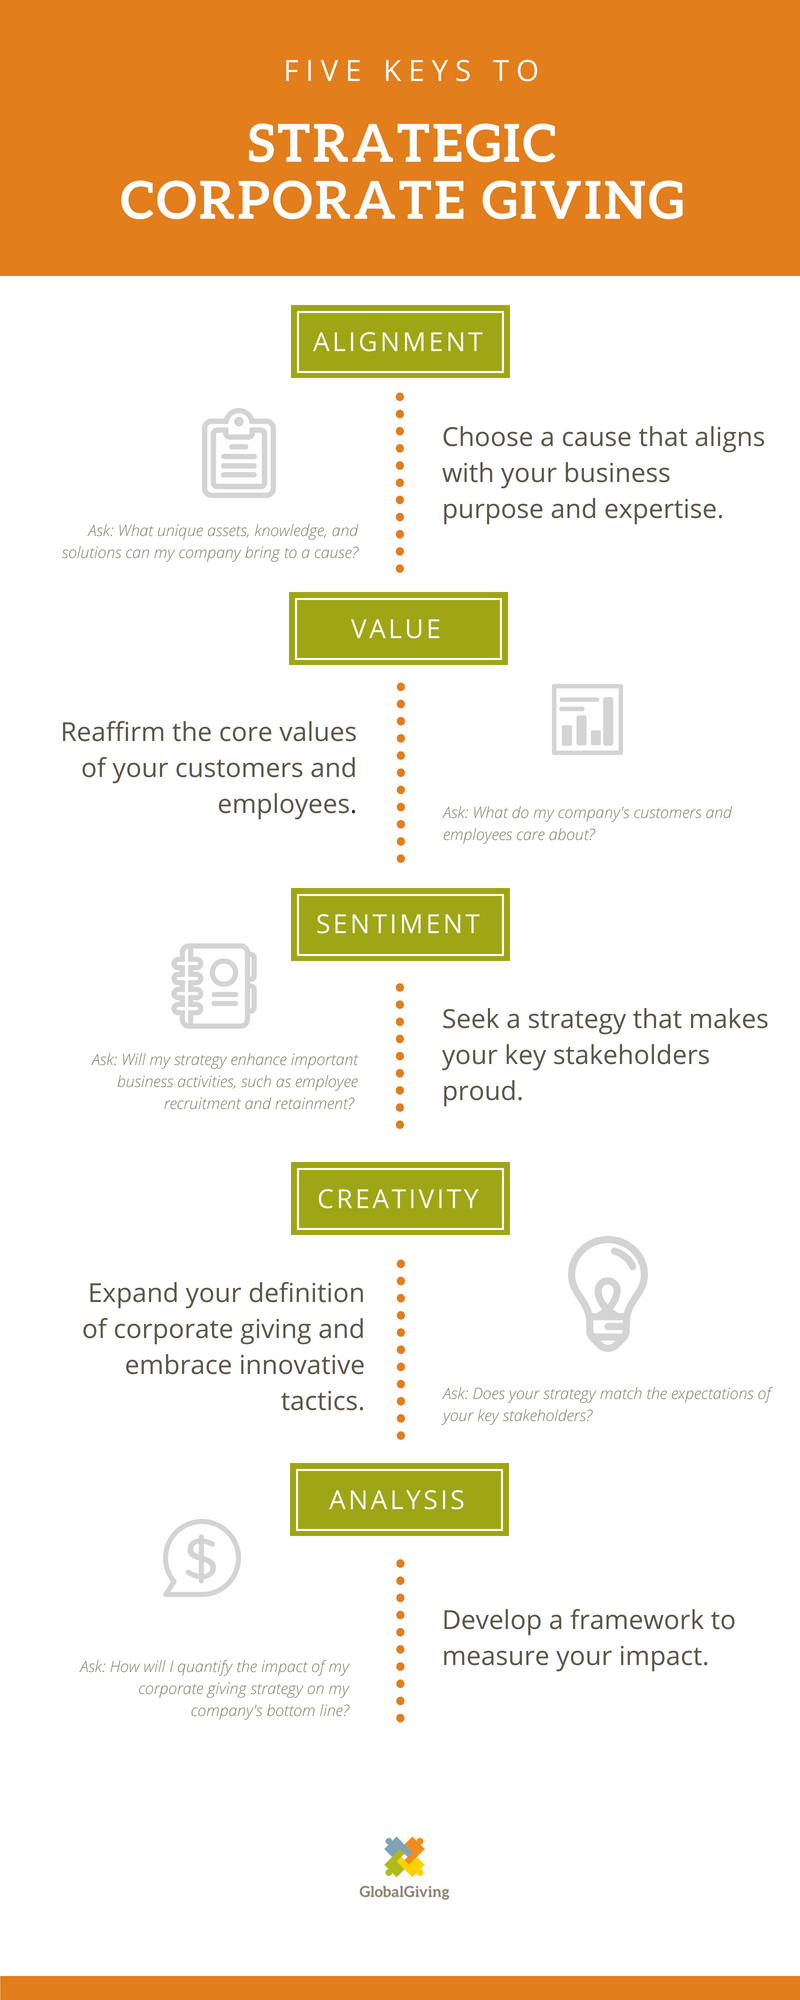 Strategic Corporate Giving Tips